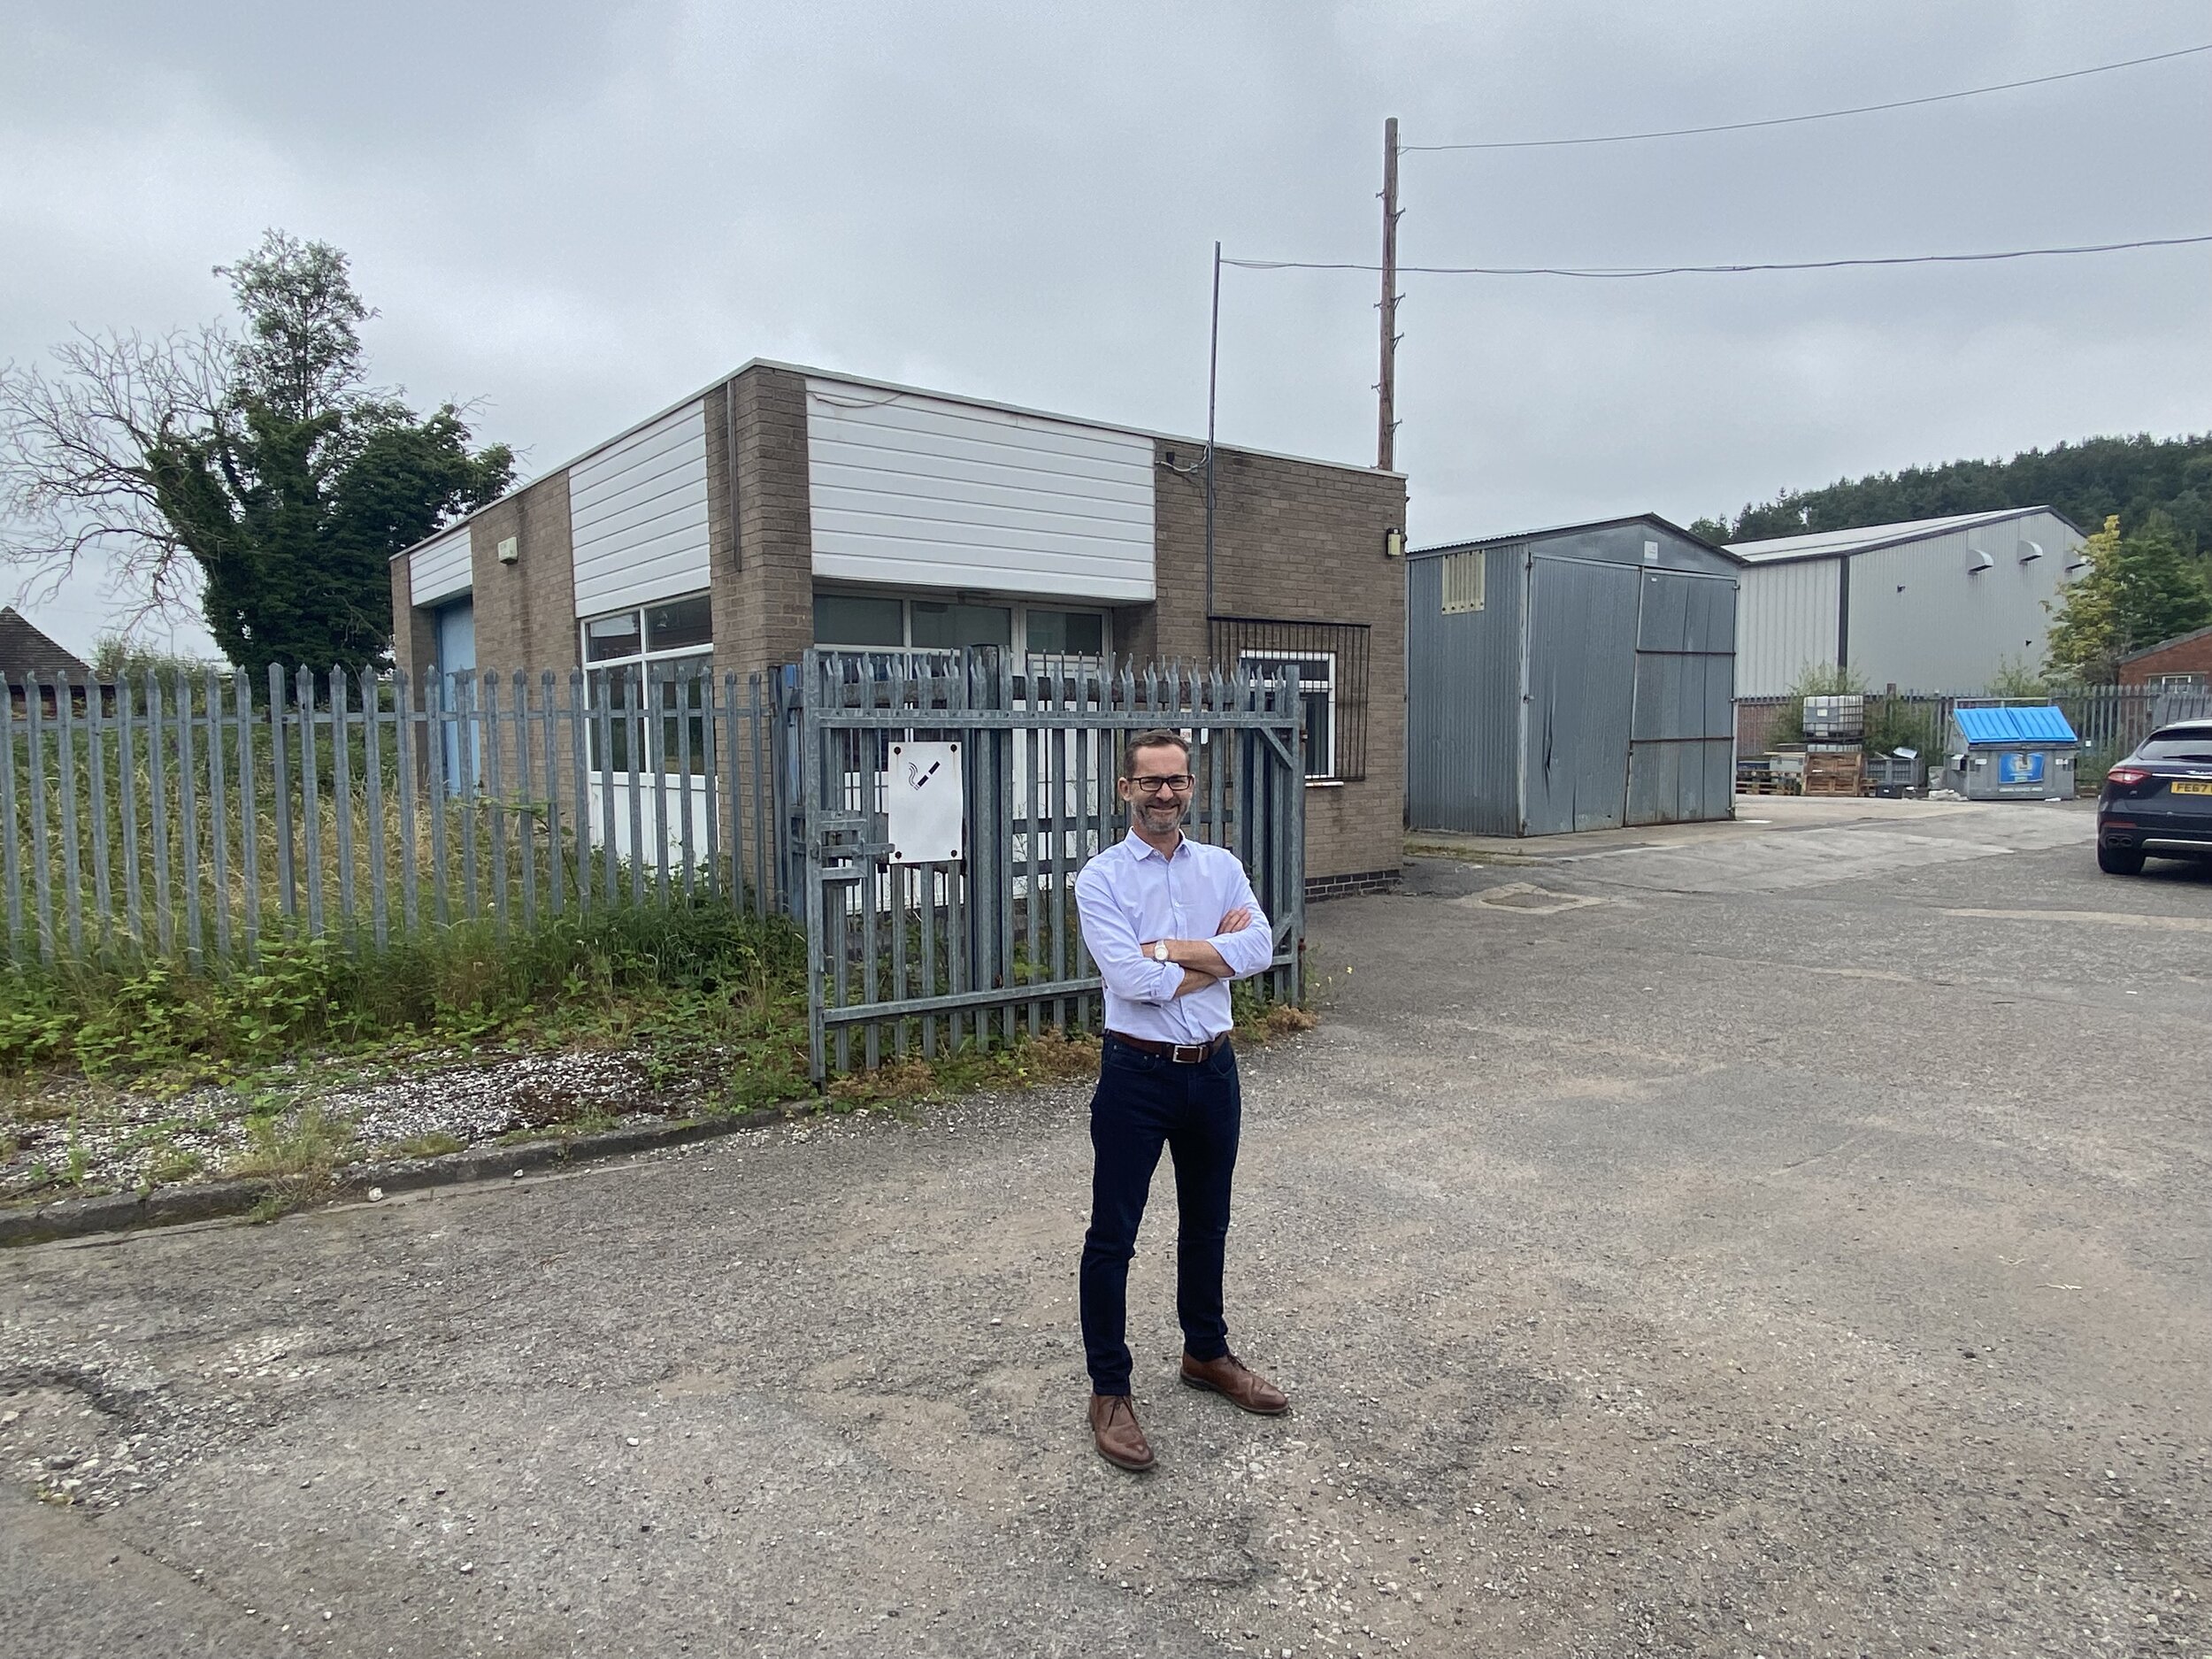 Land deal paves way for new industrial unit